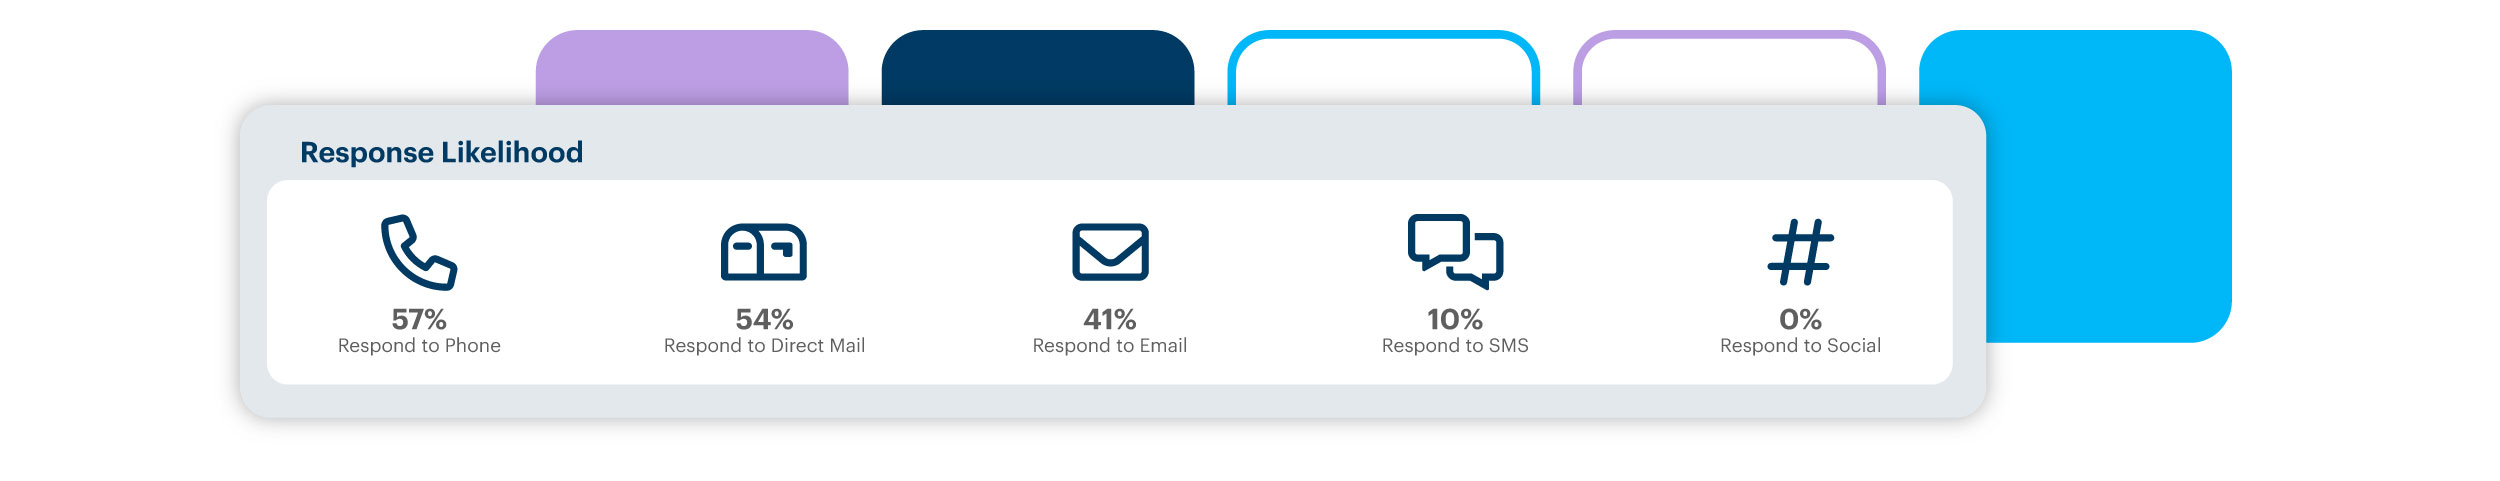 Example Response Likelihood window in DonorPerfect with percentages for phone, direct mail, email, SMS or social.